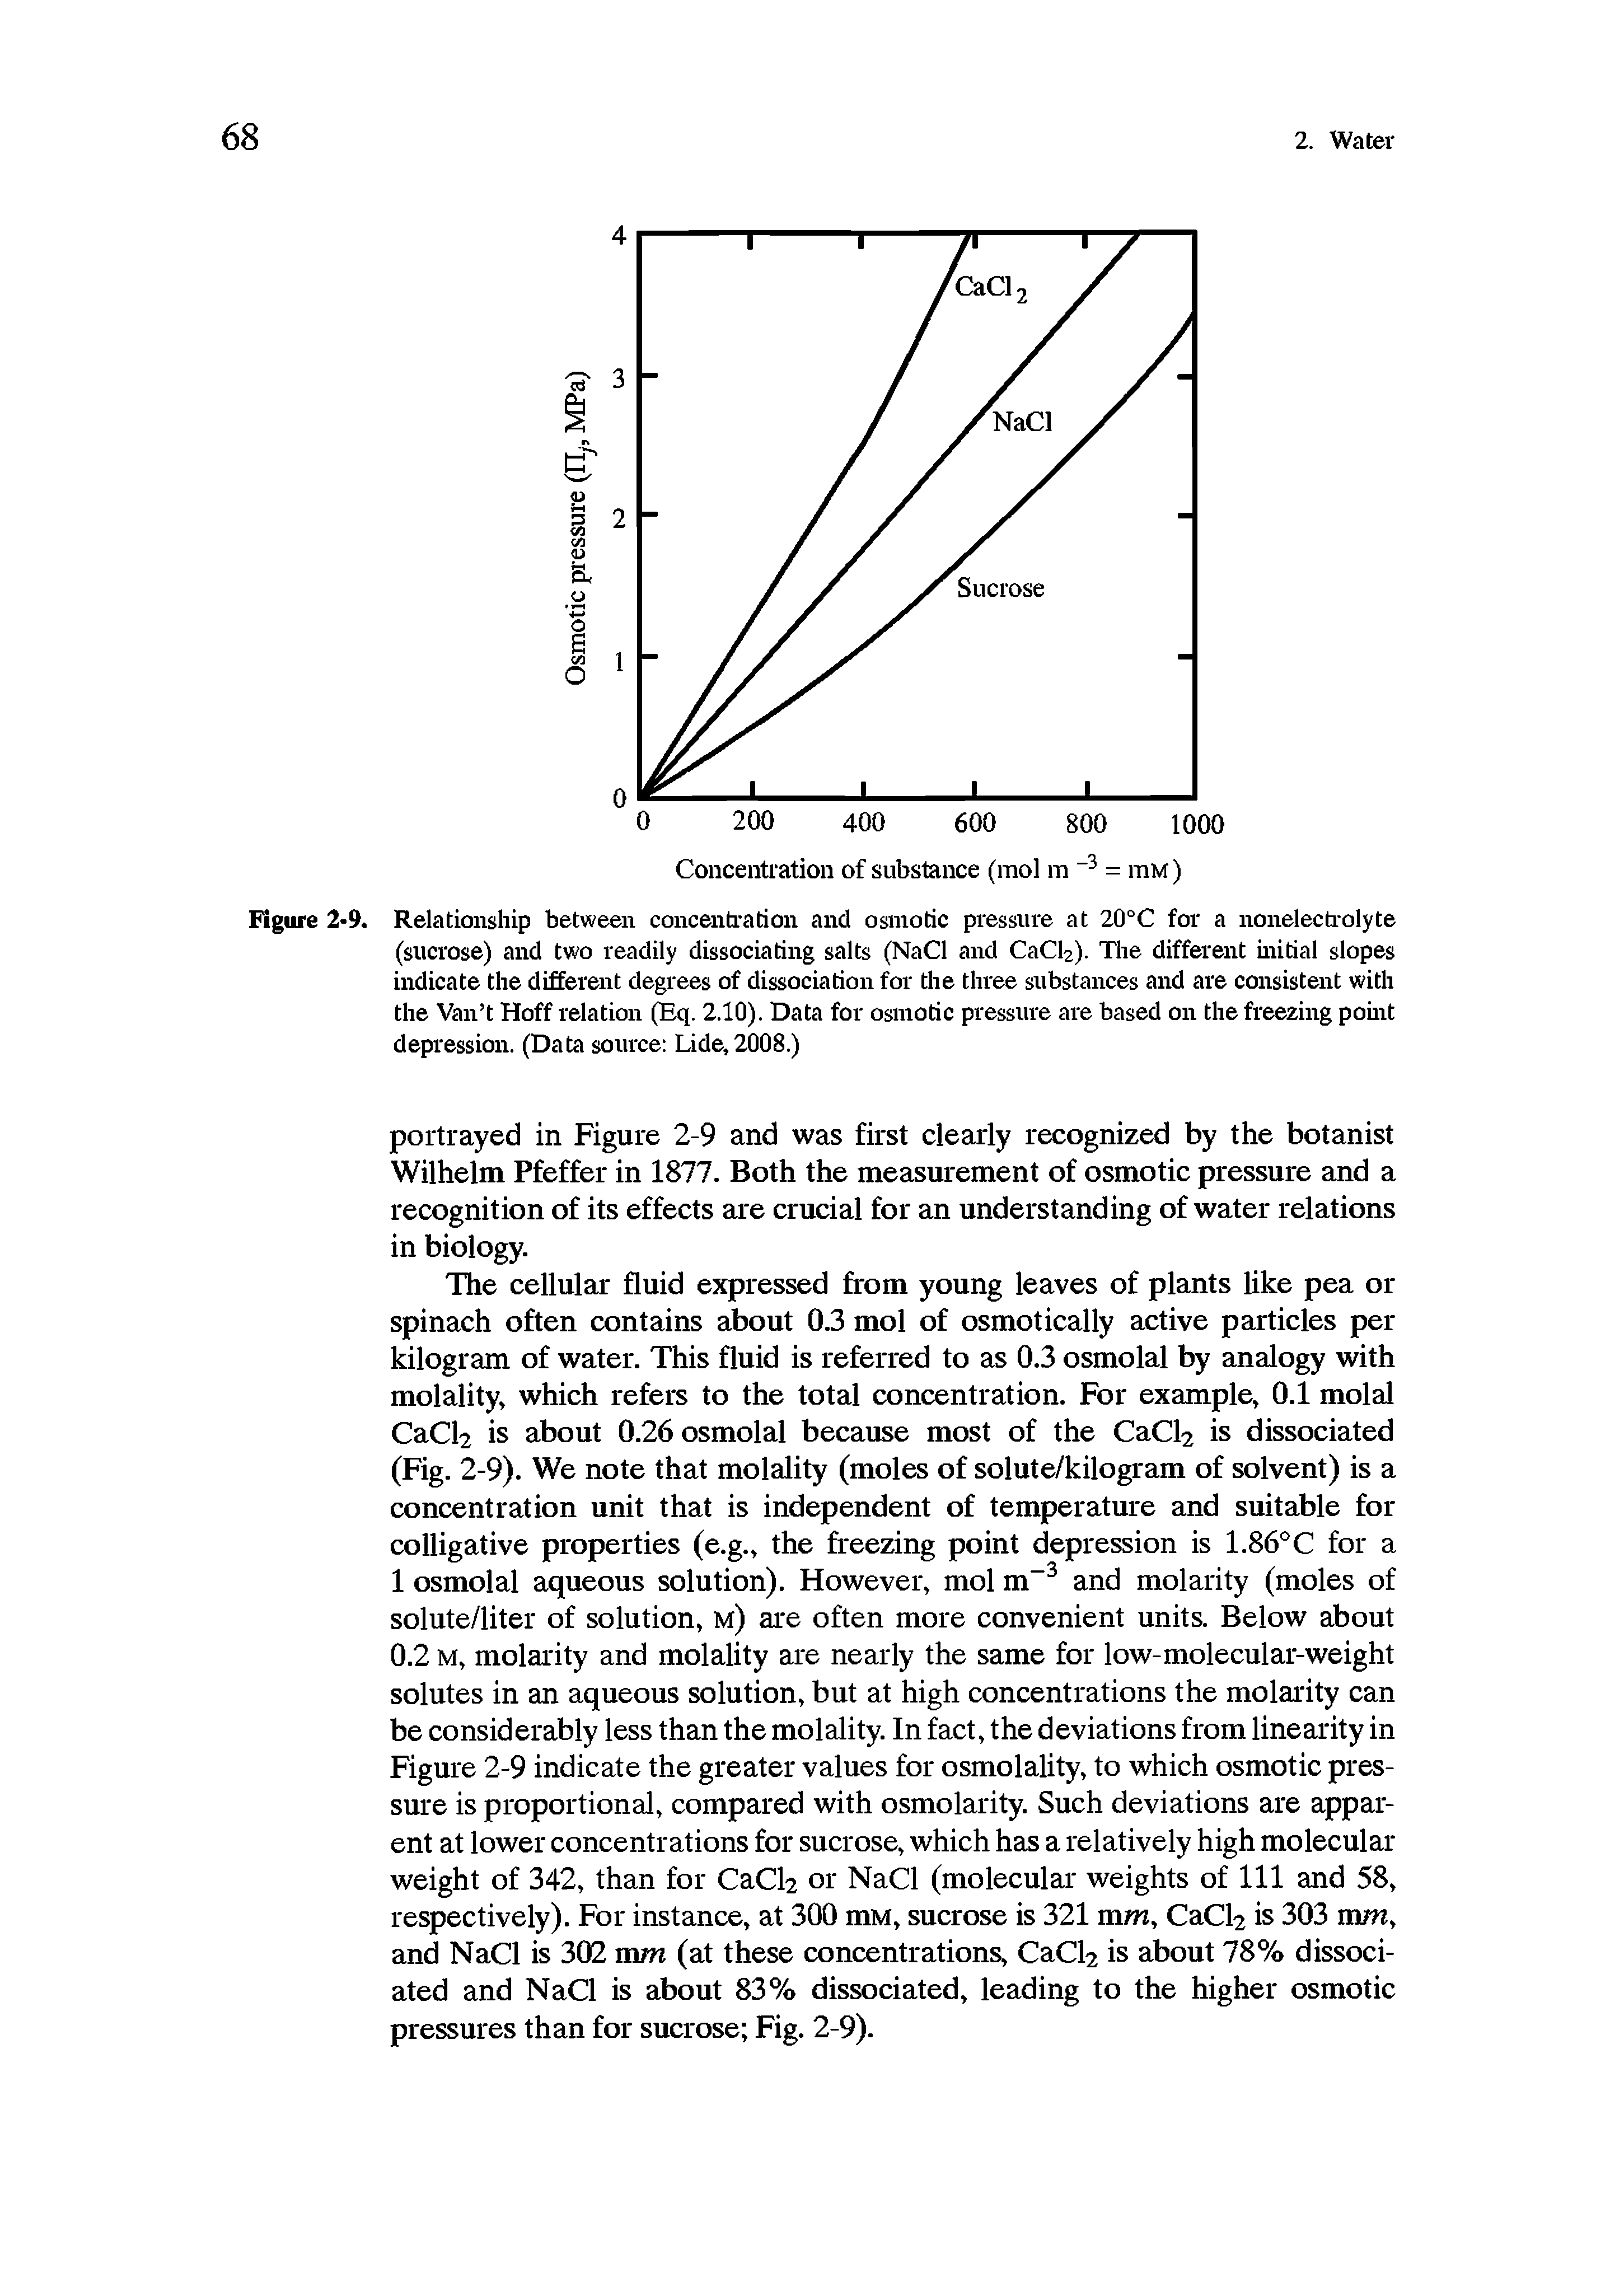 Figure 2-9. Relationship between concentration and osmotic pressure at 20°C for a nonelectrolyte (sucrose) and two readily dissociating salts (NaCl and CaCl2). The different initial slopes indicate the different degrees of dissociation for the three substances and are consistent with the Van t Hoff relation (Eq. 2.10). Data for osmotic pressure are based on the freezing point depression. (Data source Lide, 2008.)...